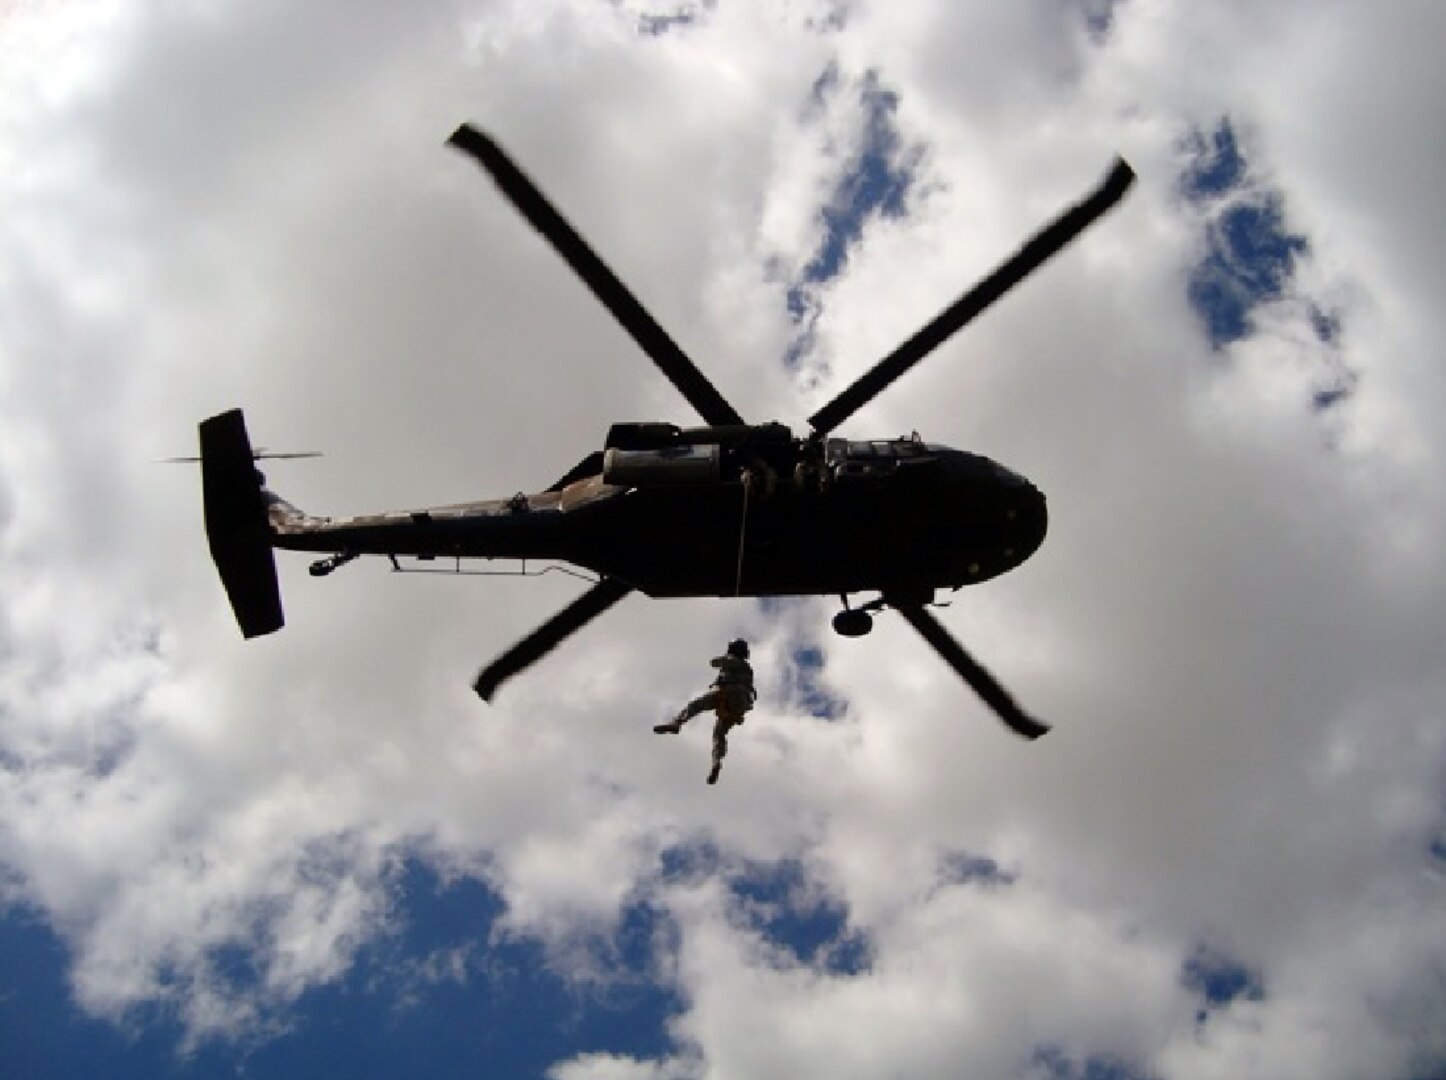 Staff Sgt. Chuck Call, of Company C, 1st Battalion, 106th Assault Helicopter Battalion, of Fort Leonard Wood, hangs from a UH-60 Black Hawk hoist during training in Springfield.